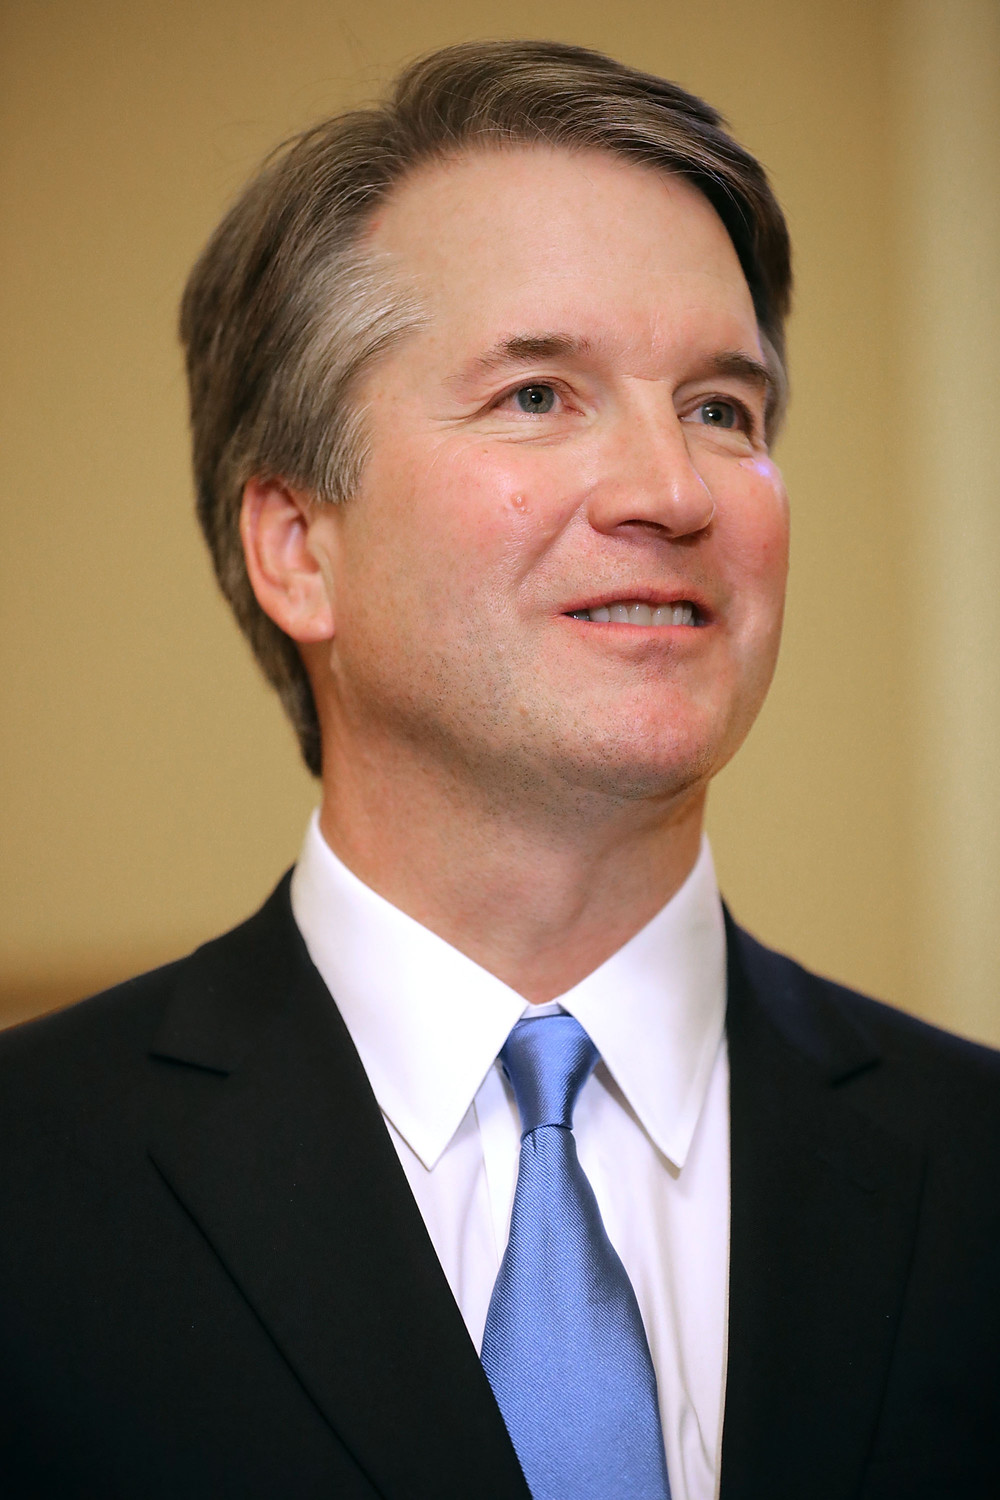 Brett Kavanaugh, a Catholic, who is a judge on the U.S. Court of Appeals for the District of Columbia Circuit, smiles July 10 before meeting with U.S. Senate Majority Leader Mitch McConnell, R-Kentucky., at the U.S. Capitol in Washington. President Donald Trump named Kavanaugh July 9 to succeed 81-year-old Justice Anthony Kennedy, who is retiring July 31.